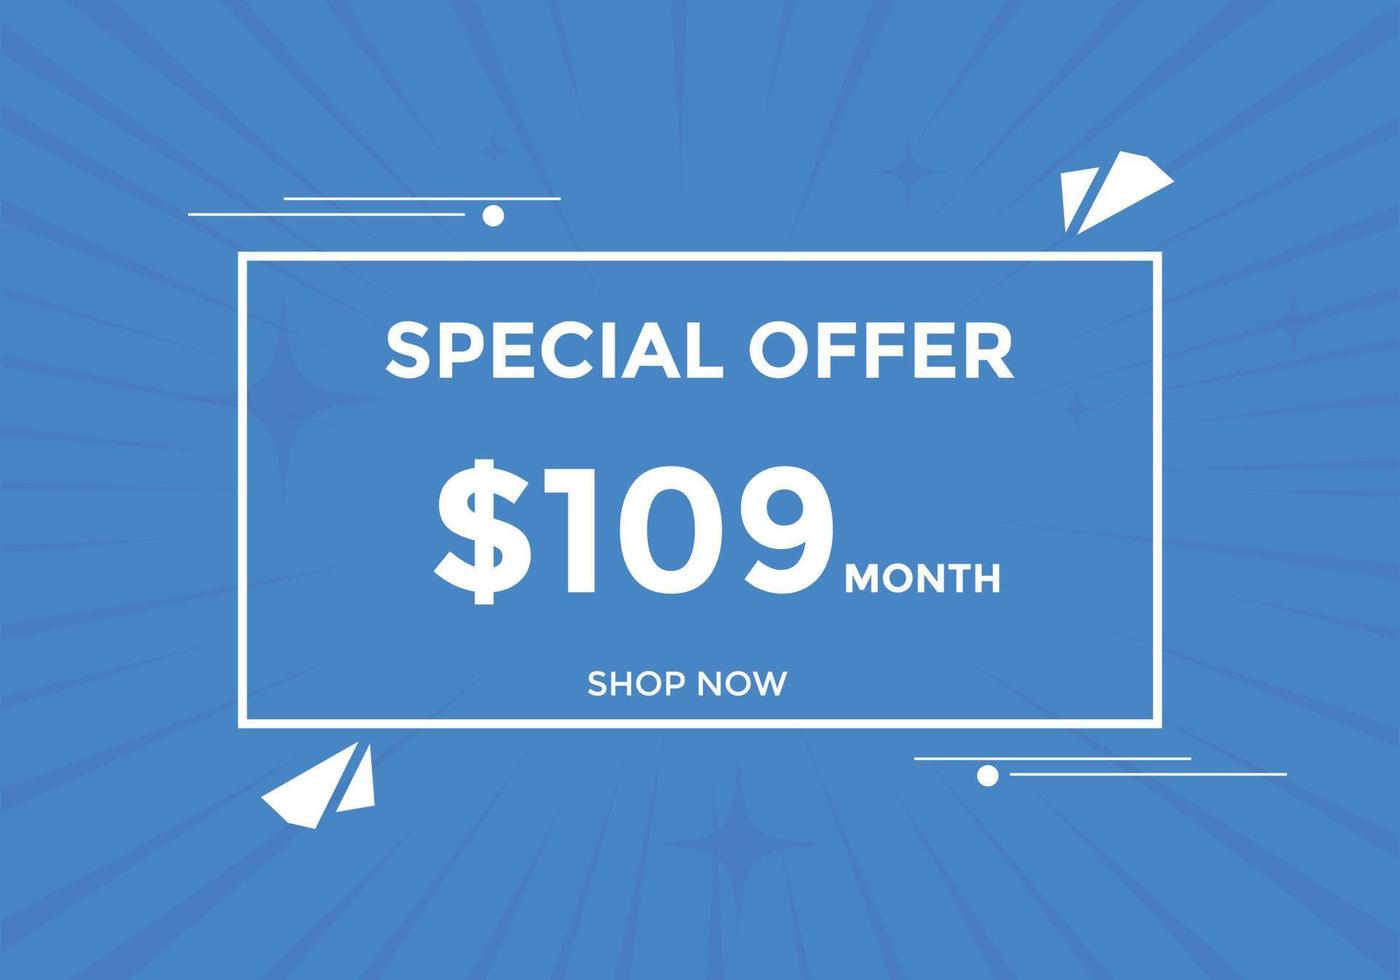 109 USD Dollar Month sale promotion Banner. Special offer, 109 dollar month price tag, shop now button. Business or shopping promotion marketing concept vector